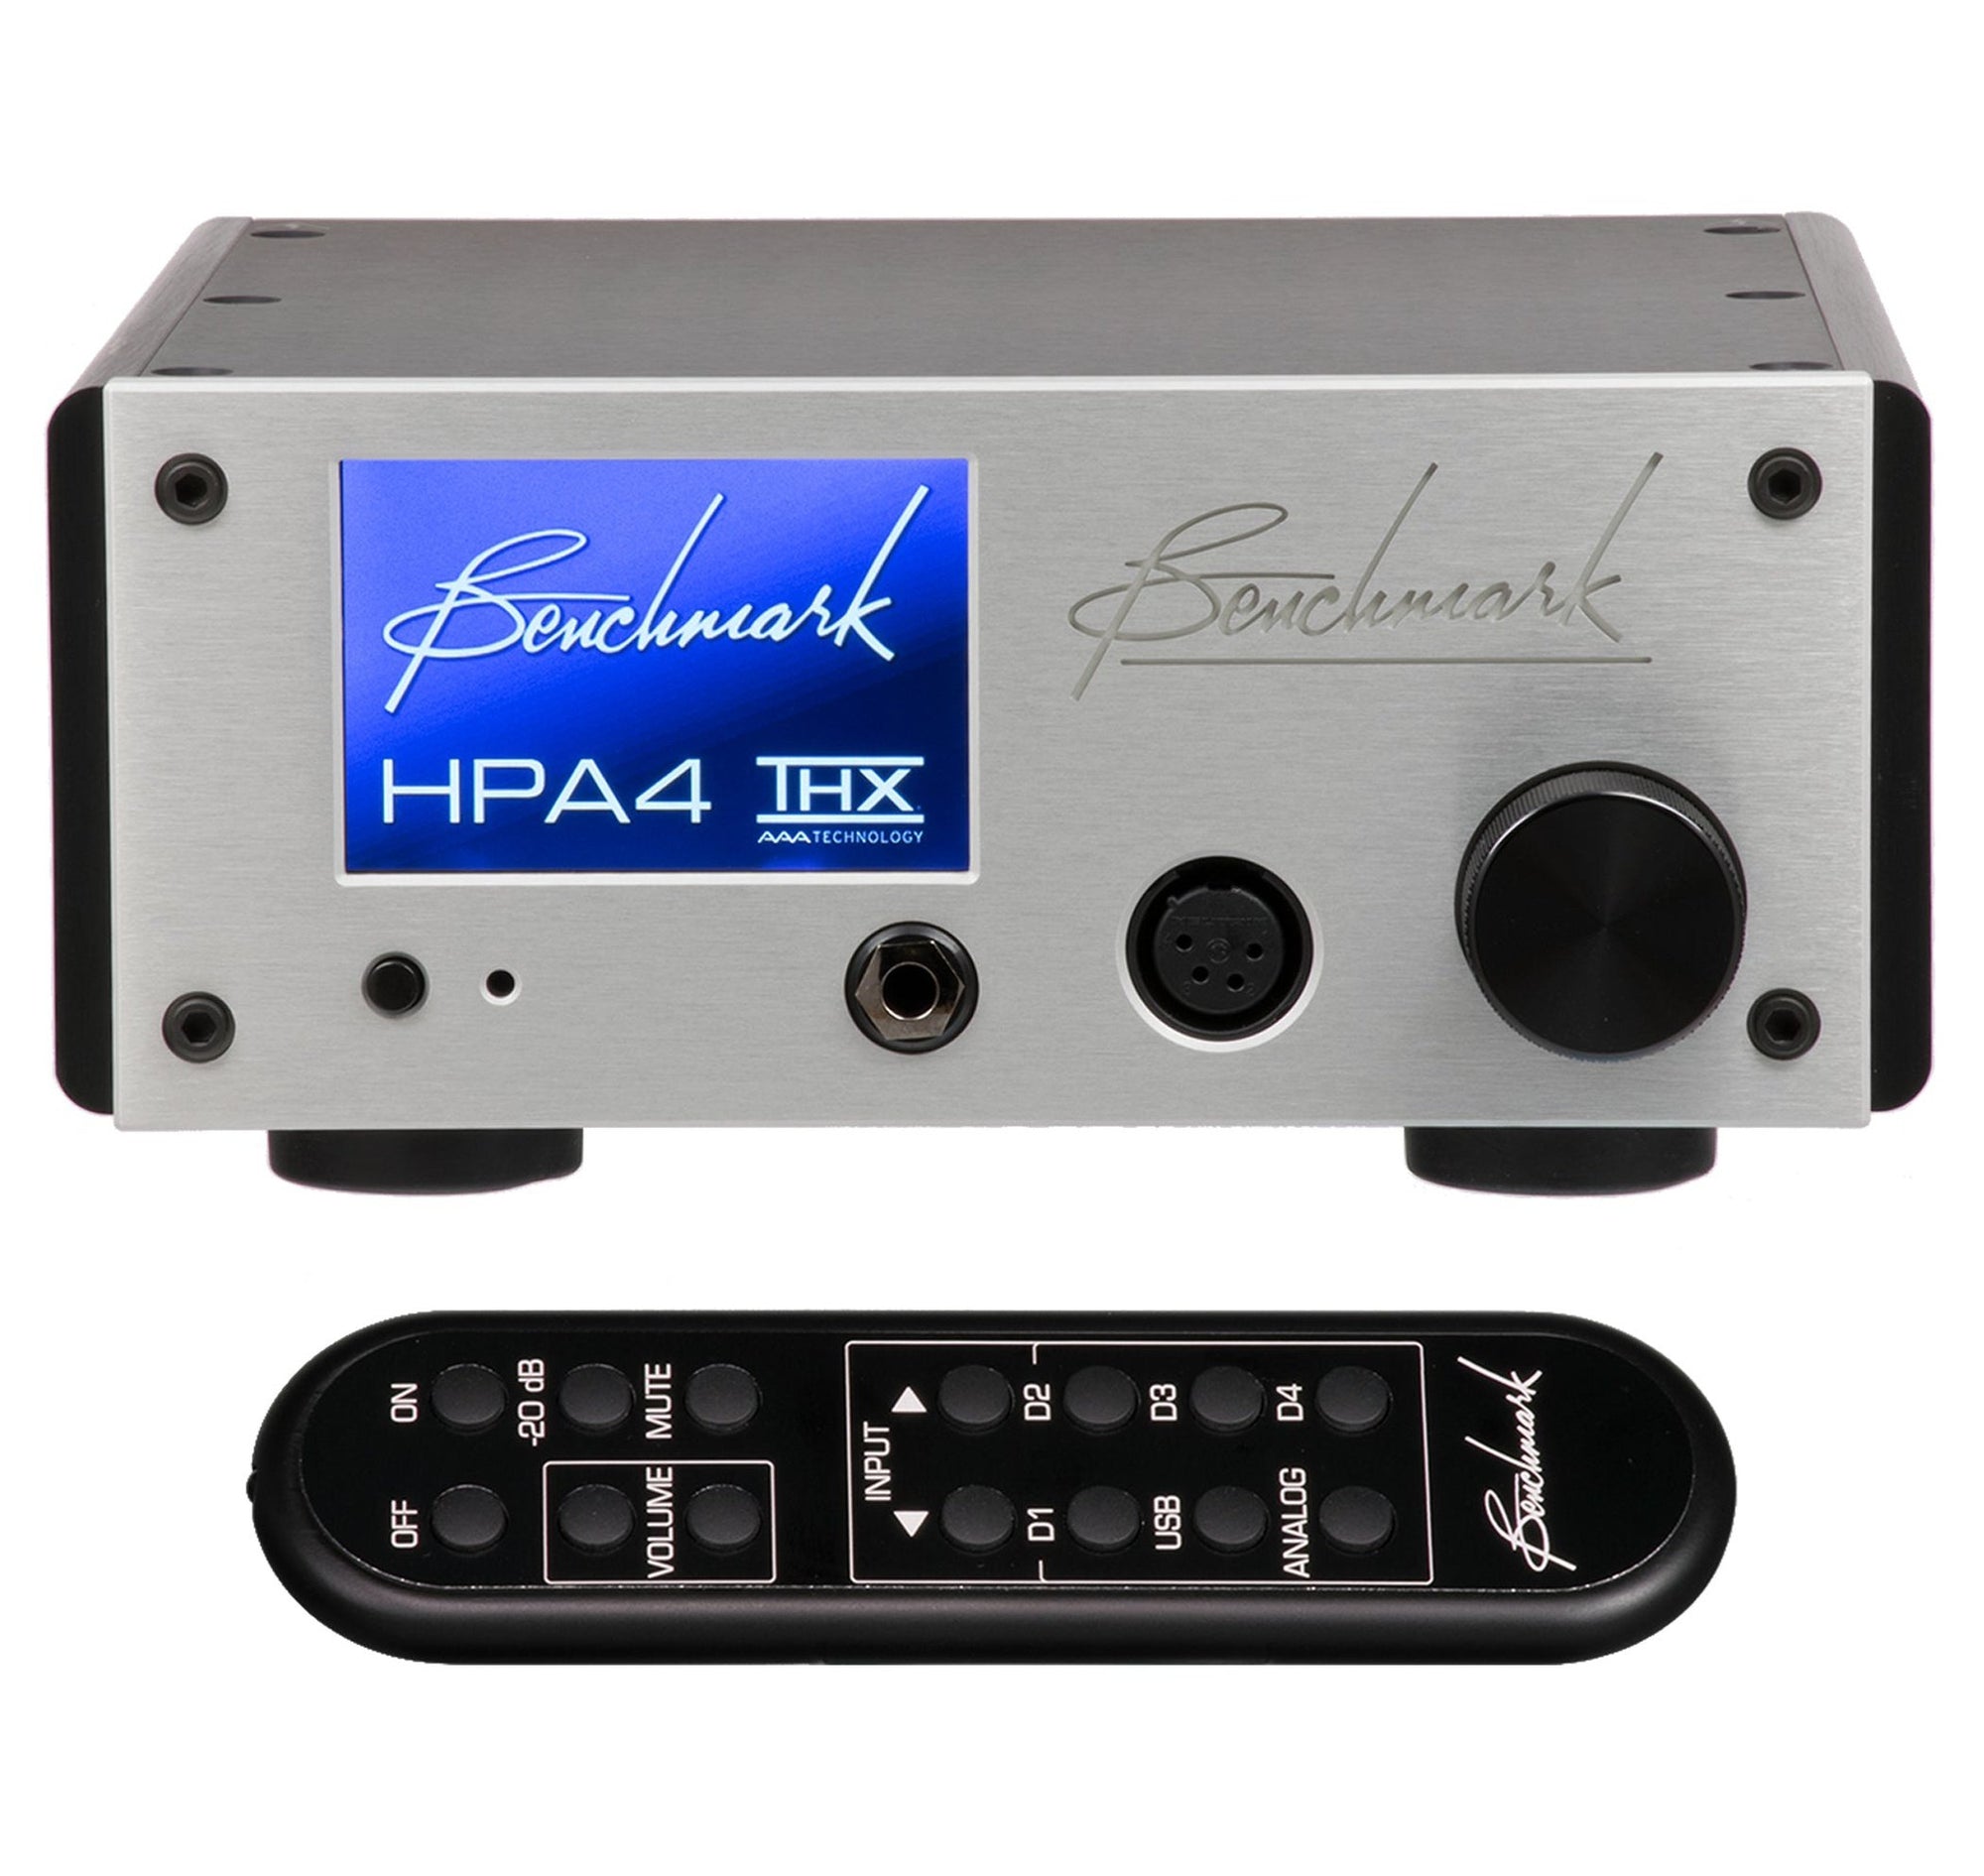 Benchmark HPA4 Silver with Remote Control